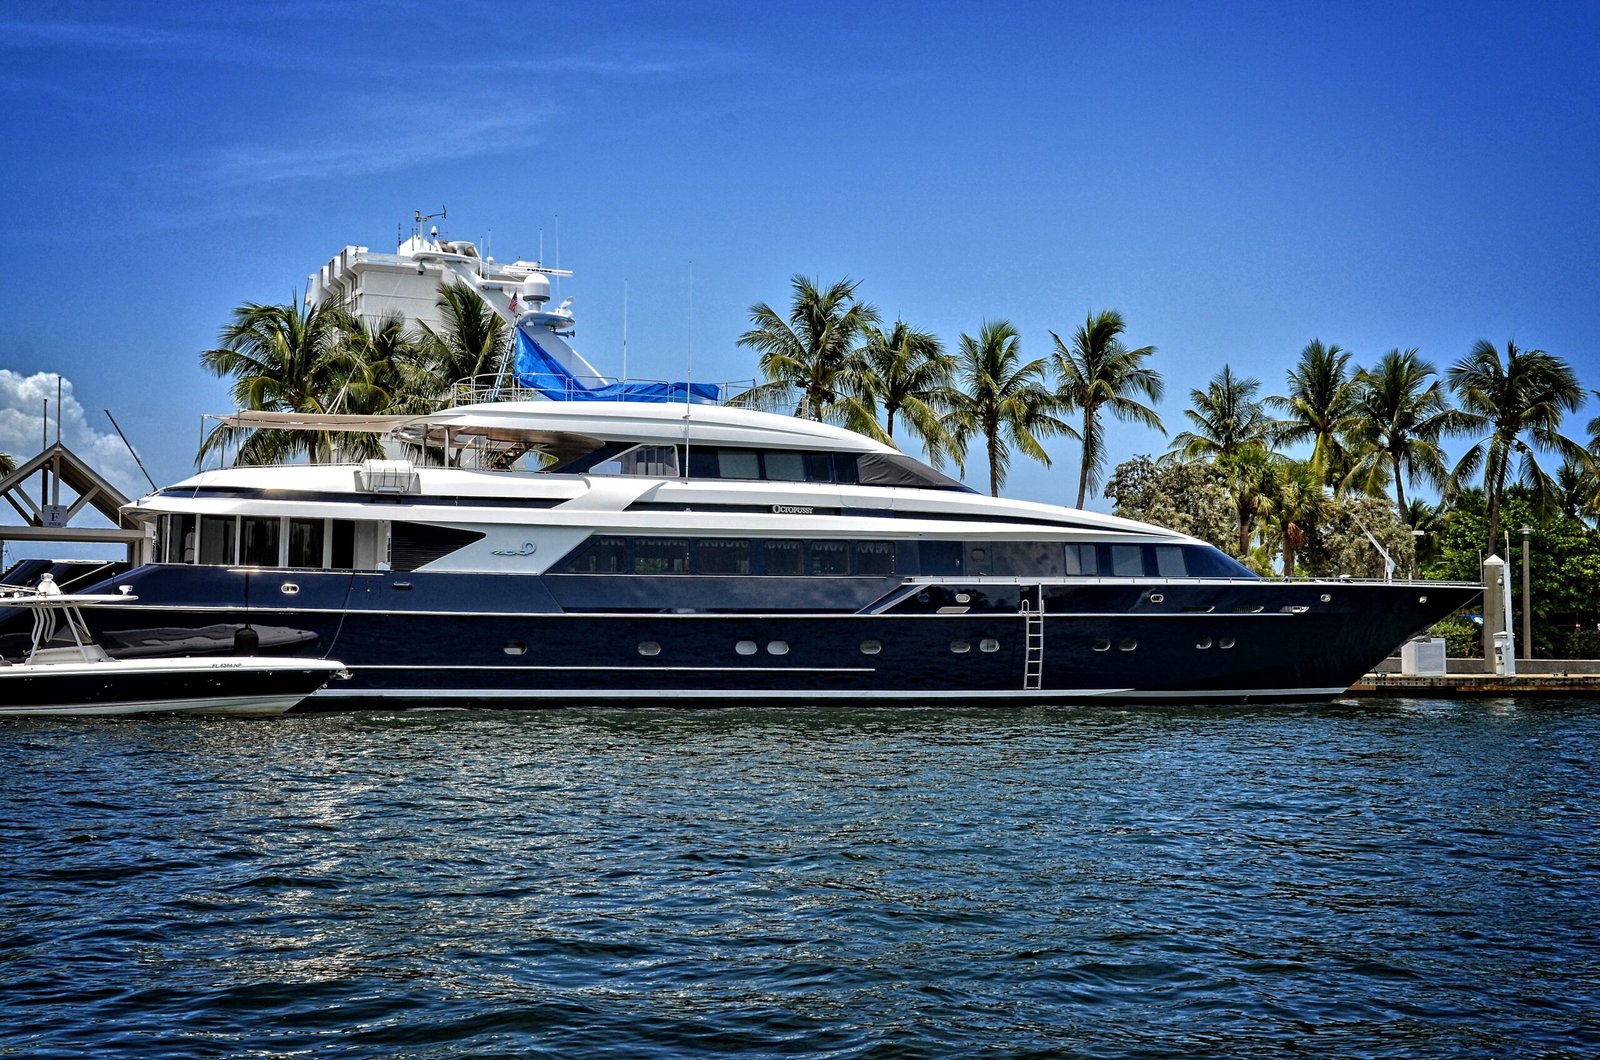 How much does a yacht rental cost